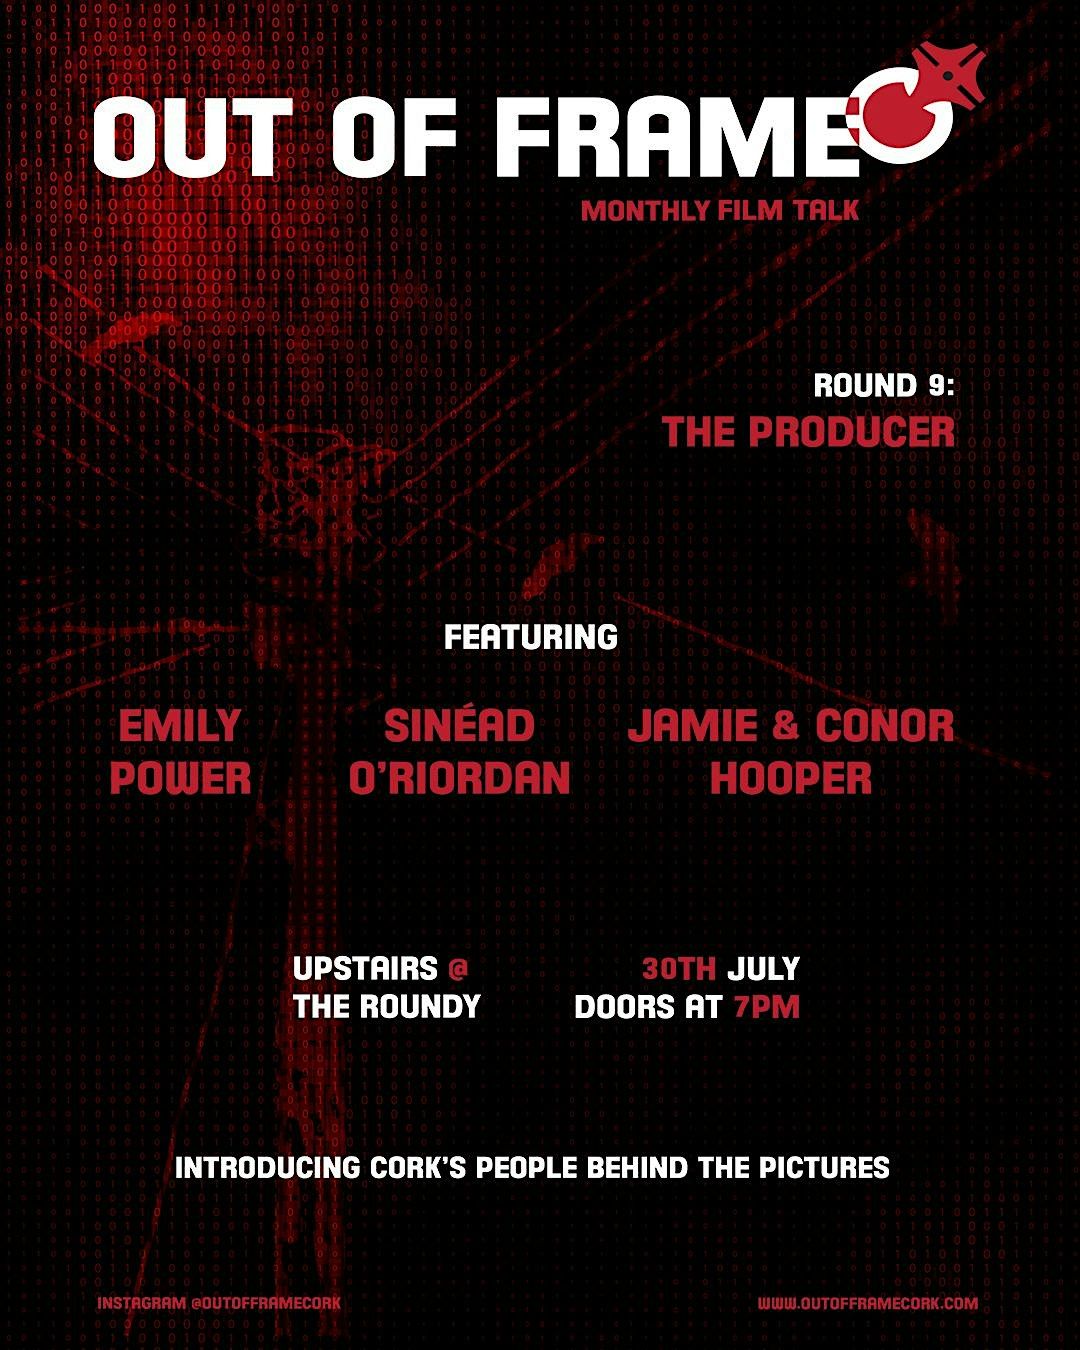 OUT OF FRAME - Cork's Monthly Film Talk - Round 9: The Producer